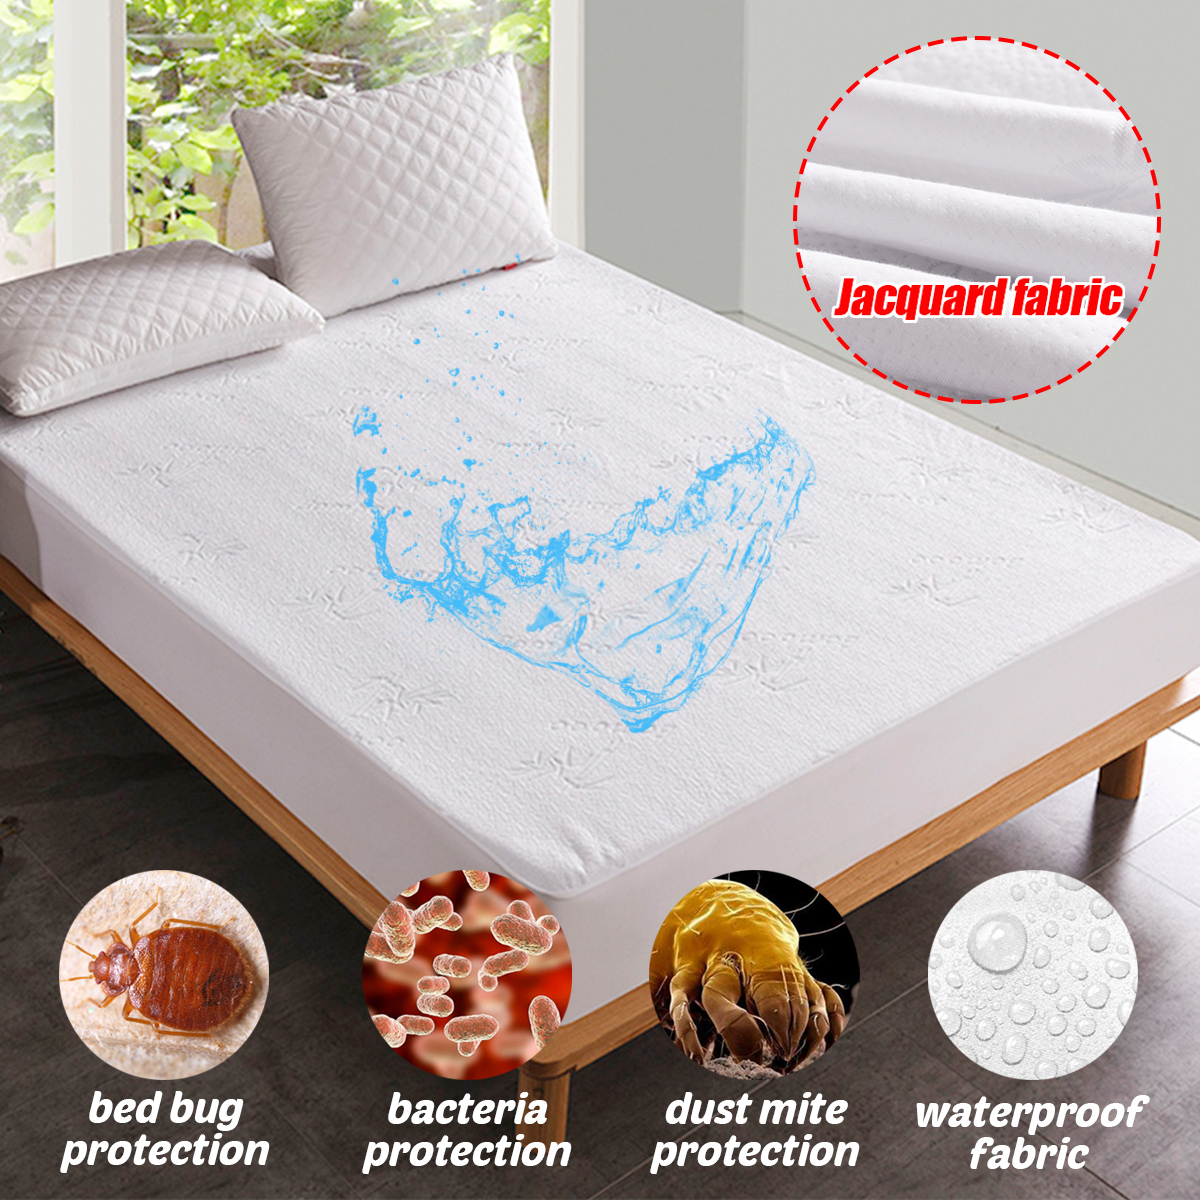 Waterproof-Bamboo-Jacquard-Mattress-Topper-Protector-Cover-Pad-Hypoallergenic-Bedding-Set-1688692-2